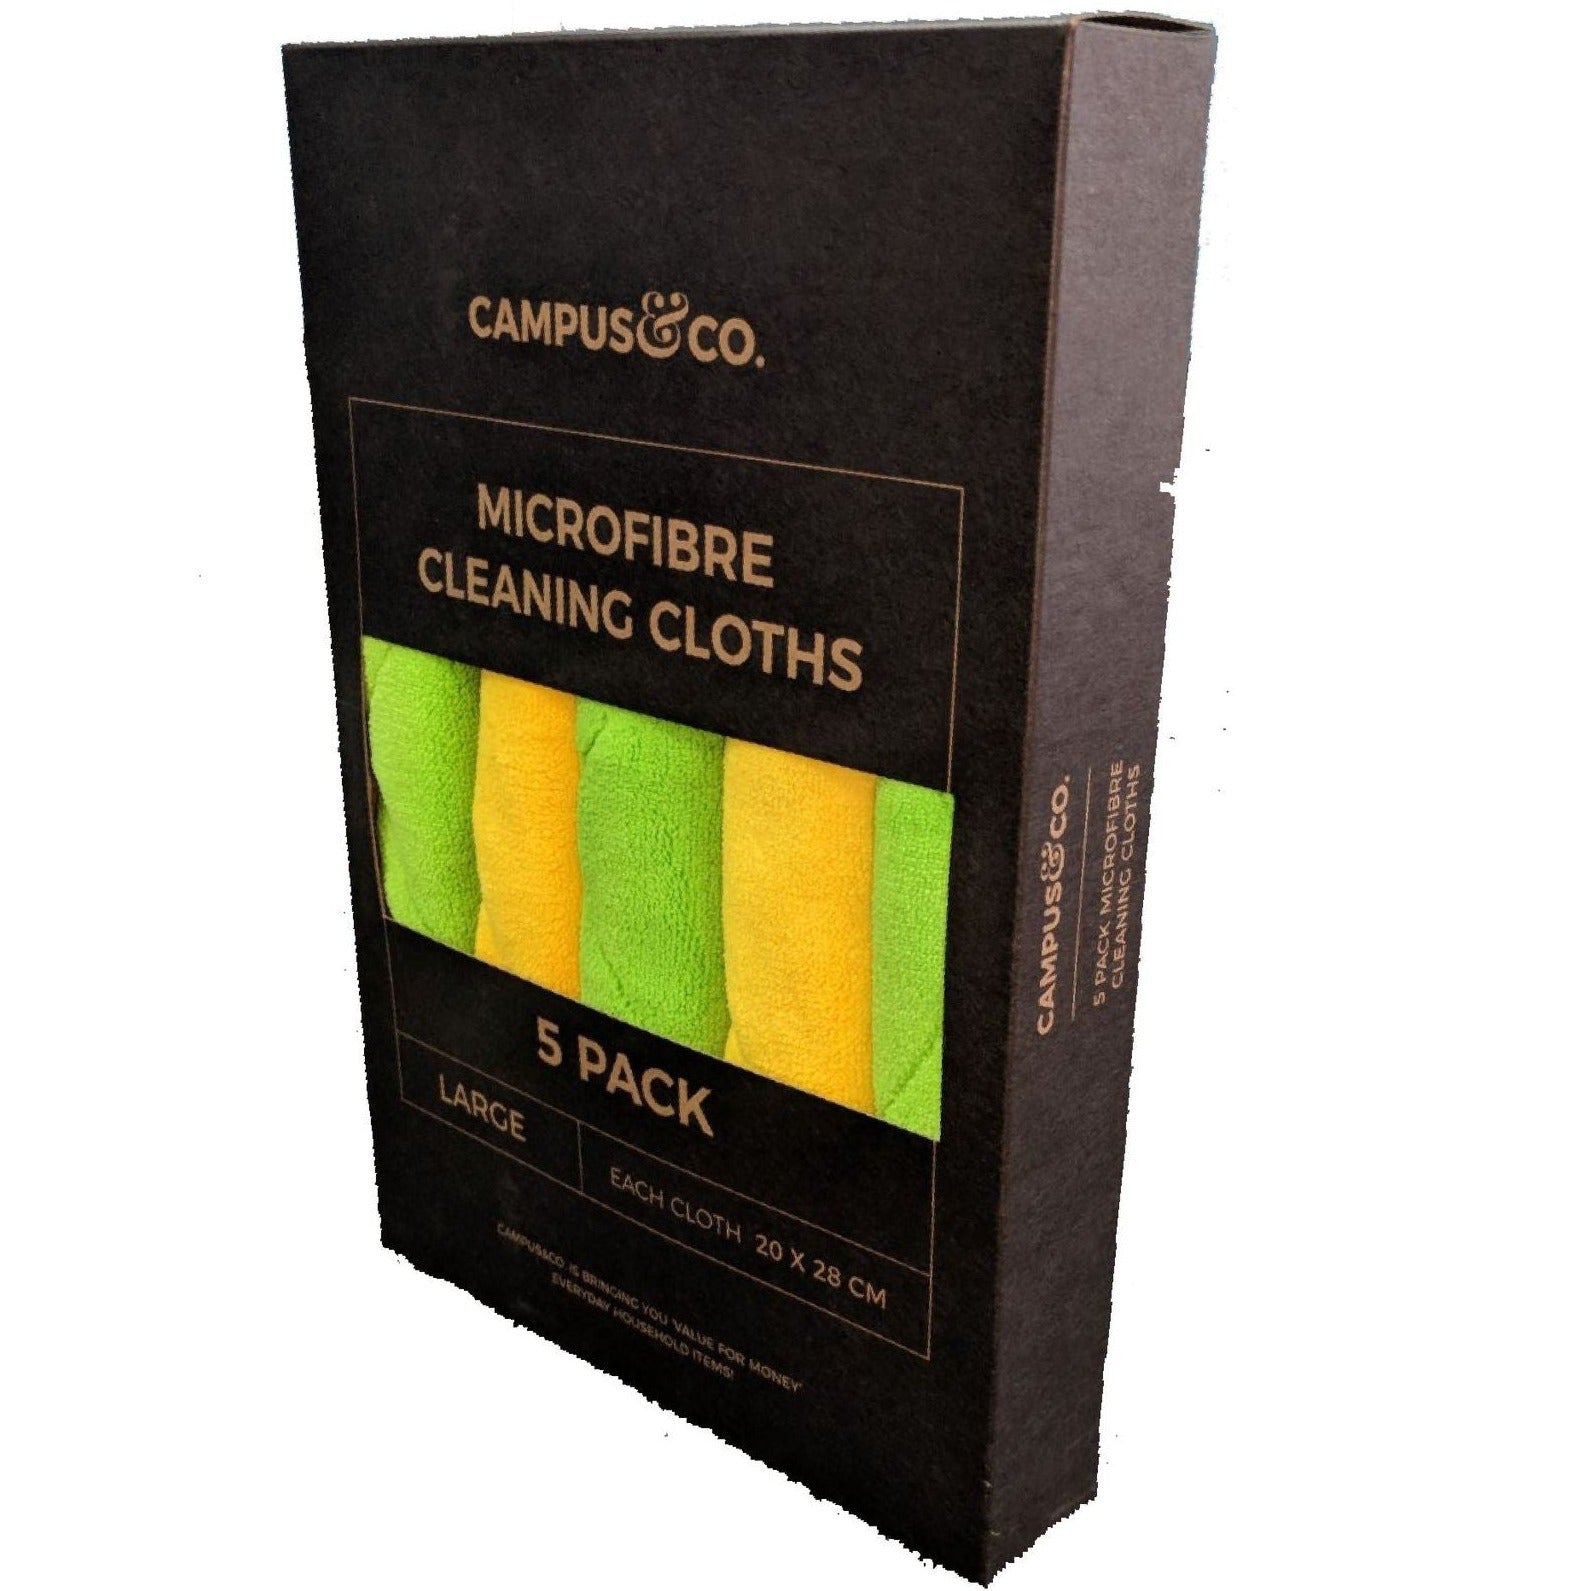 Campus & Co Microfibre Cleaning Cloth 5pk